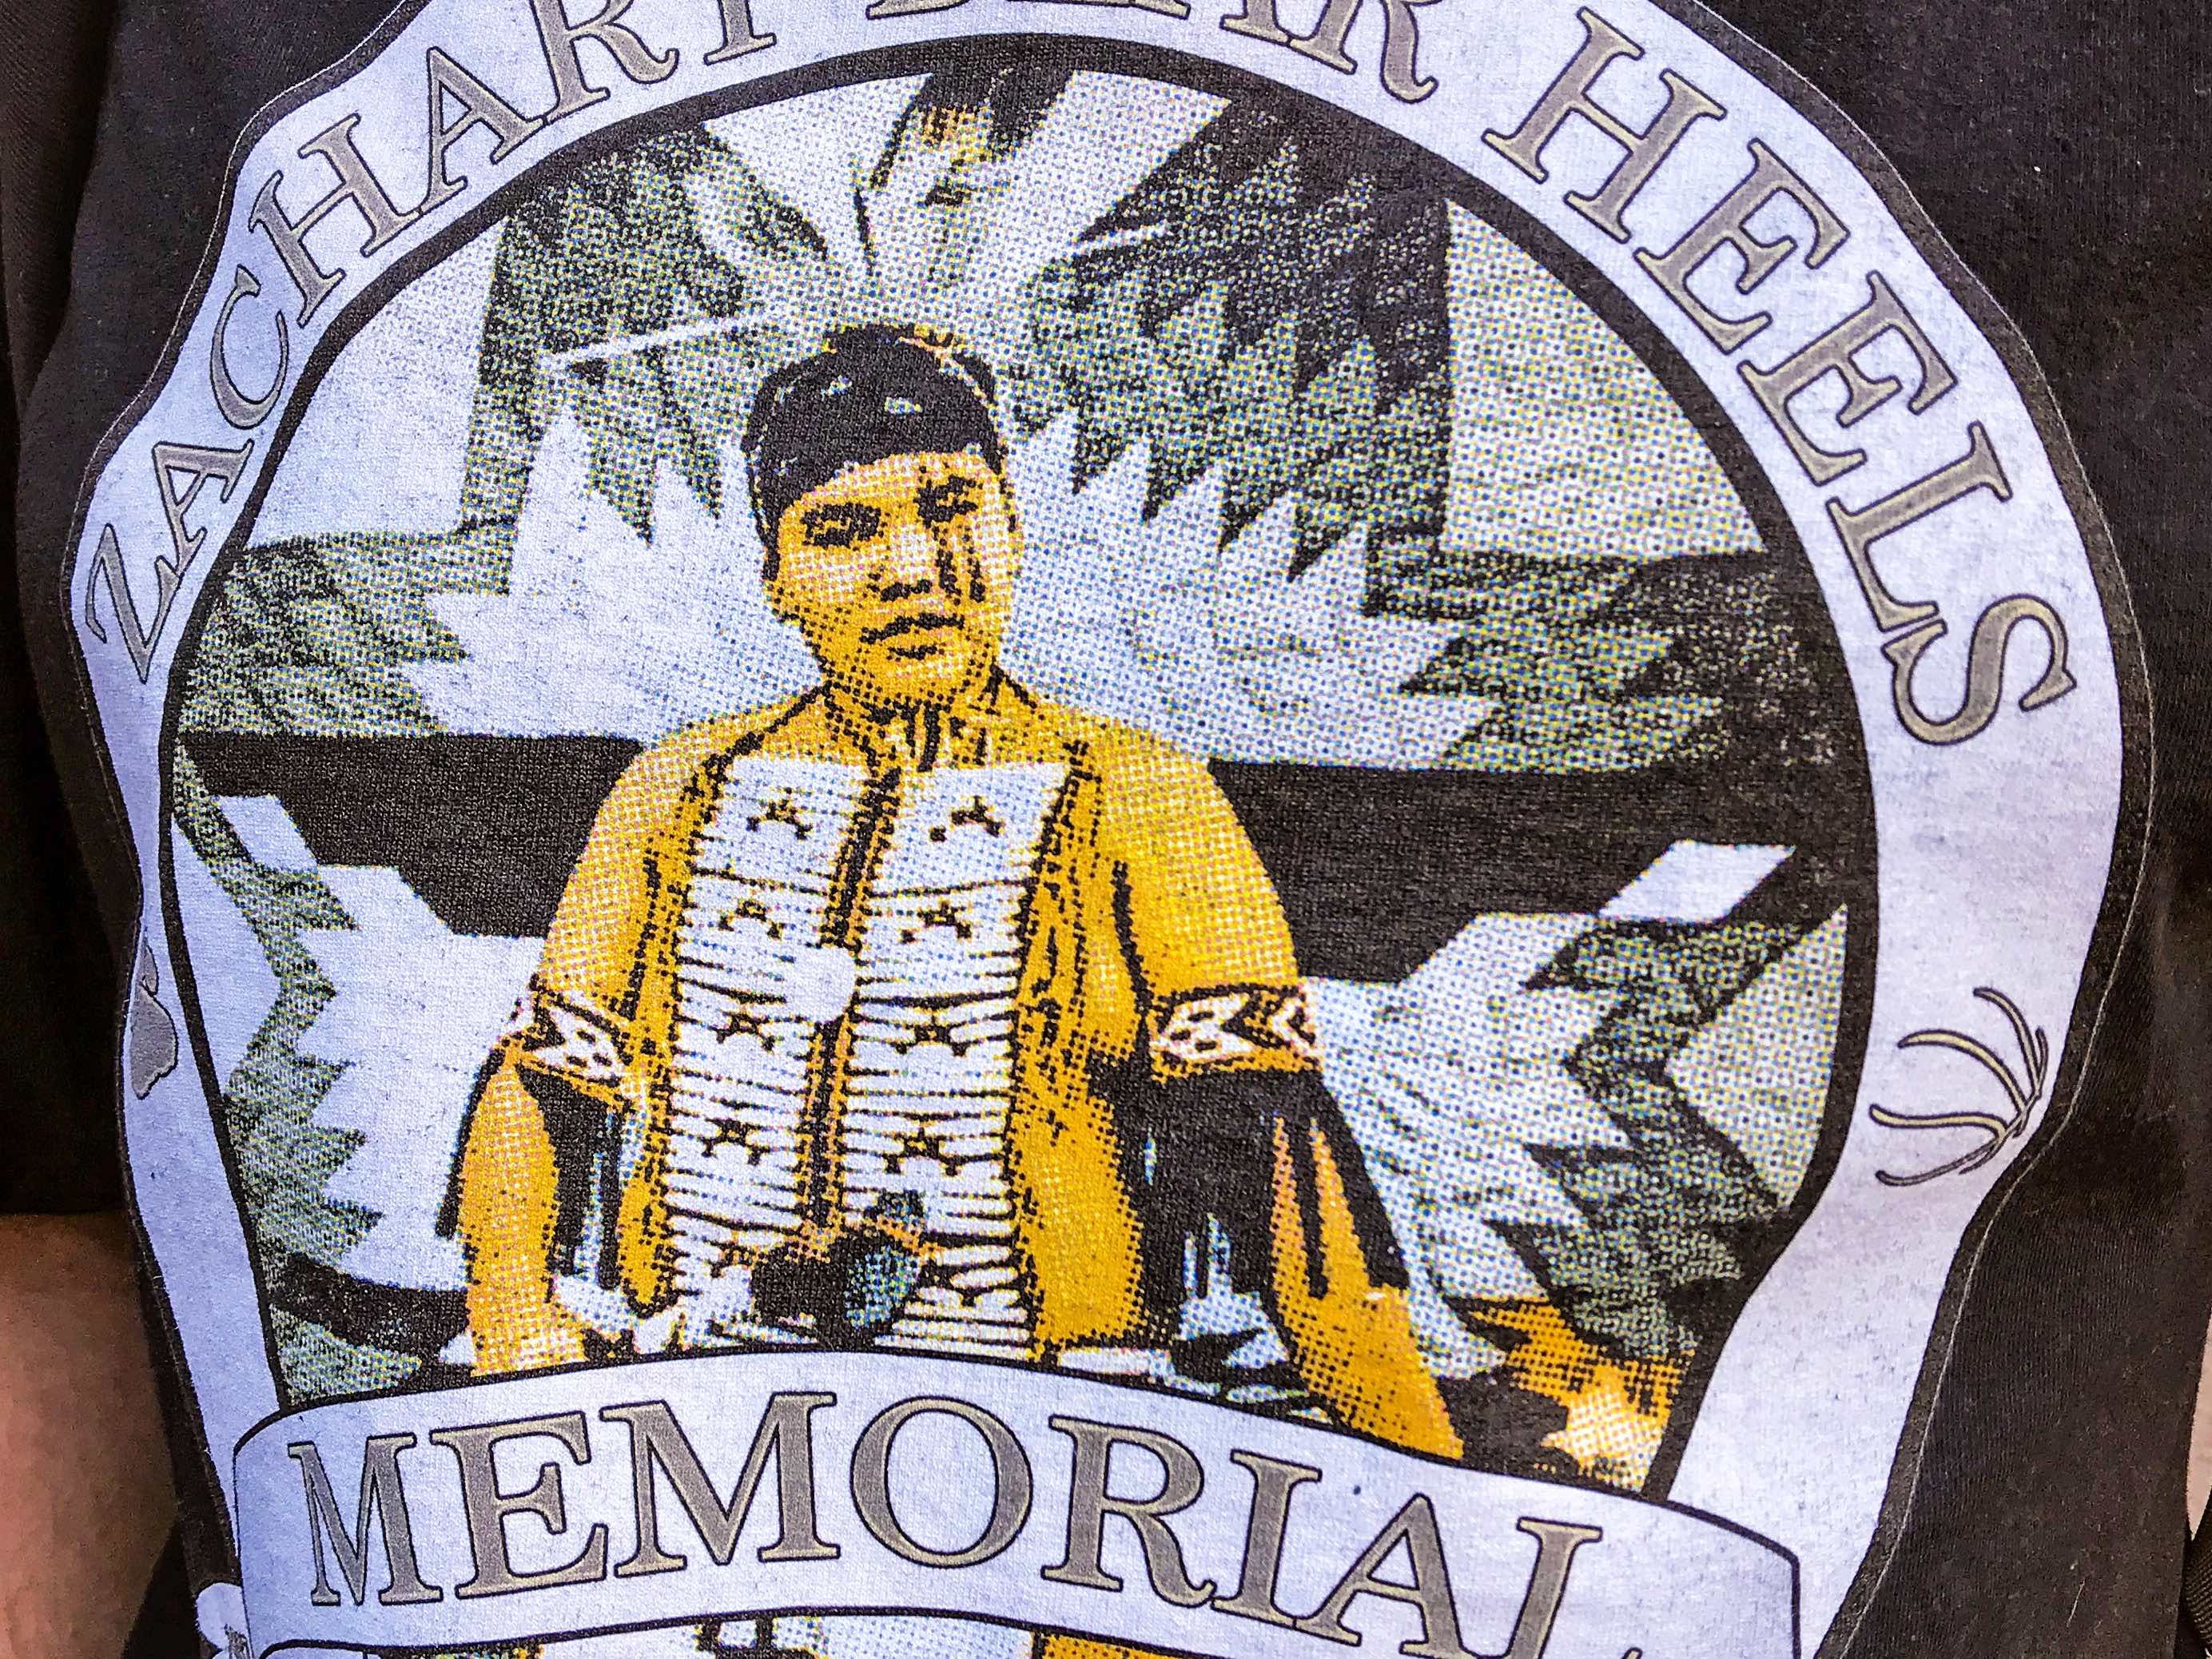 'No amount of money is ever going to bring him back': City settles lawsuit for death of Native man beaten by police officers